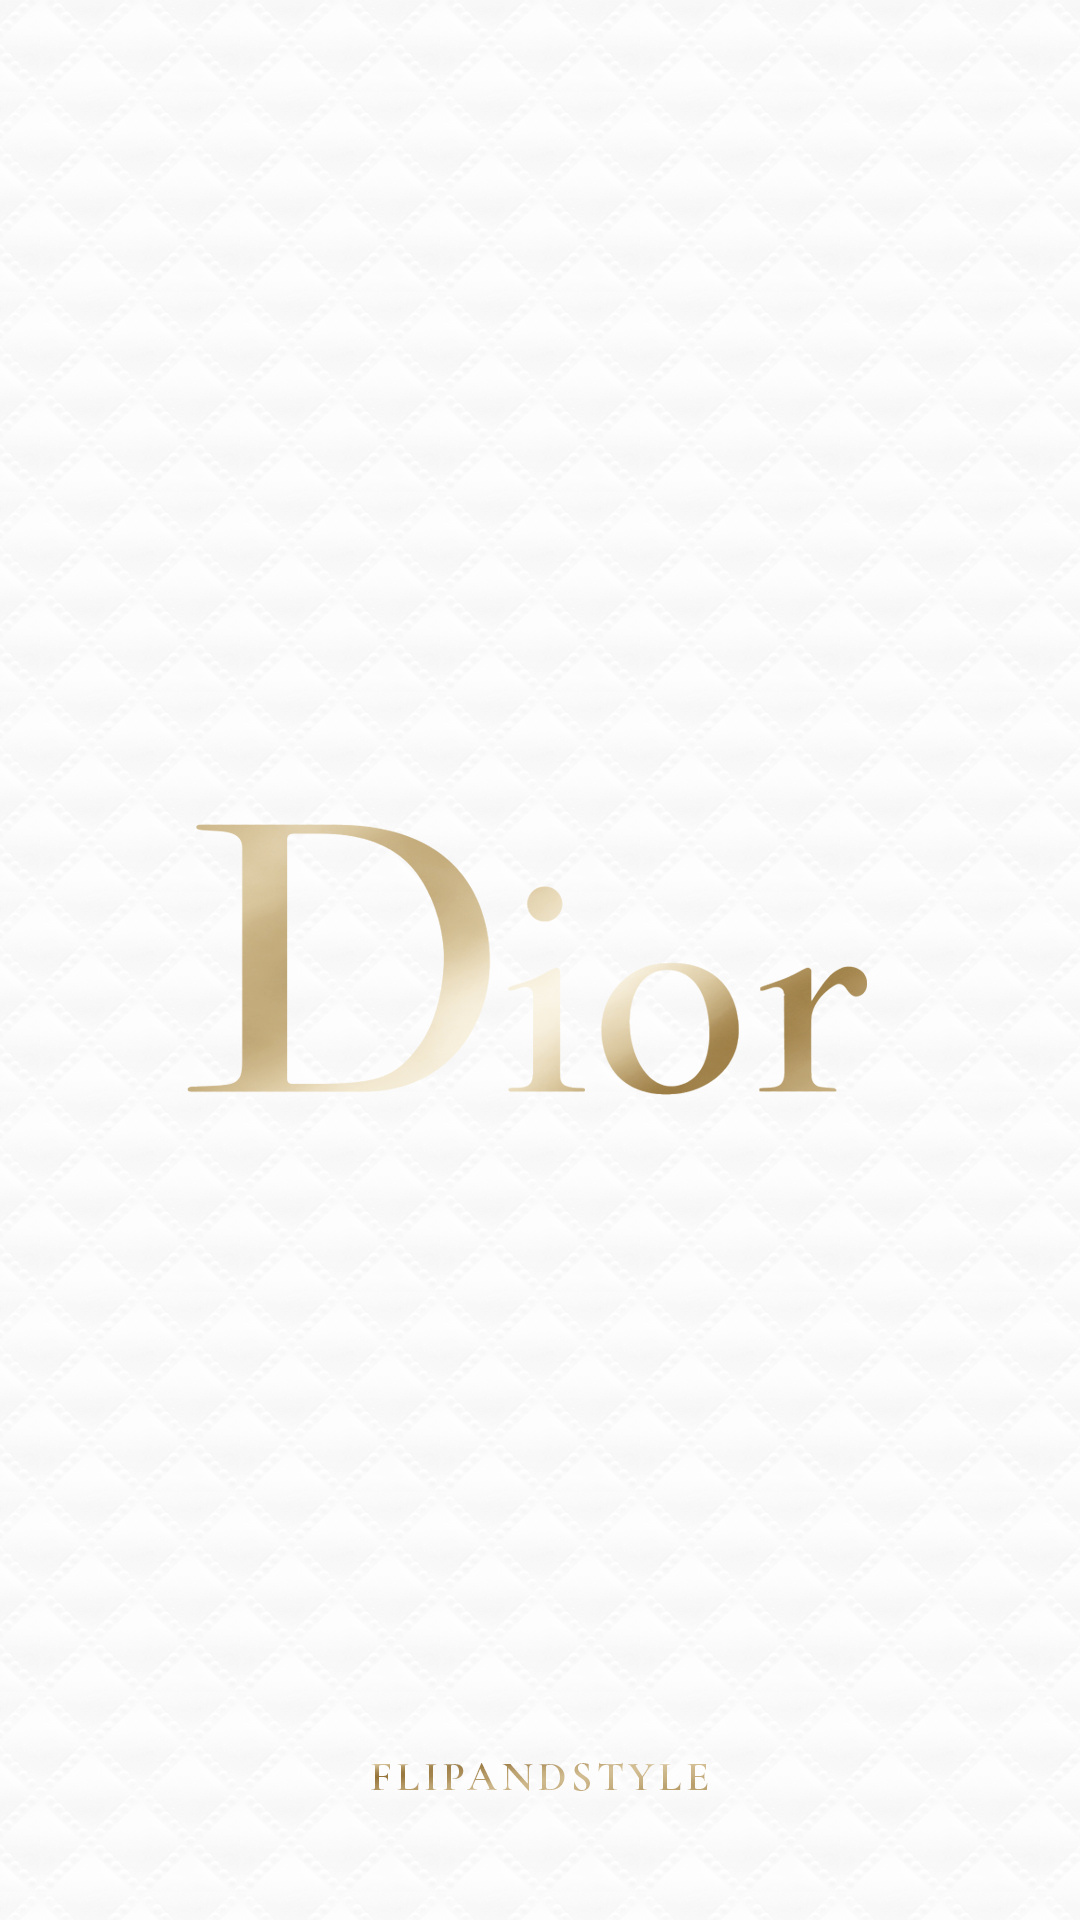 Dior: A luxury goods company famed for revolutionizing the women's fashion industry. 1080x1920 Full HD Background.